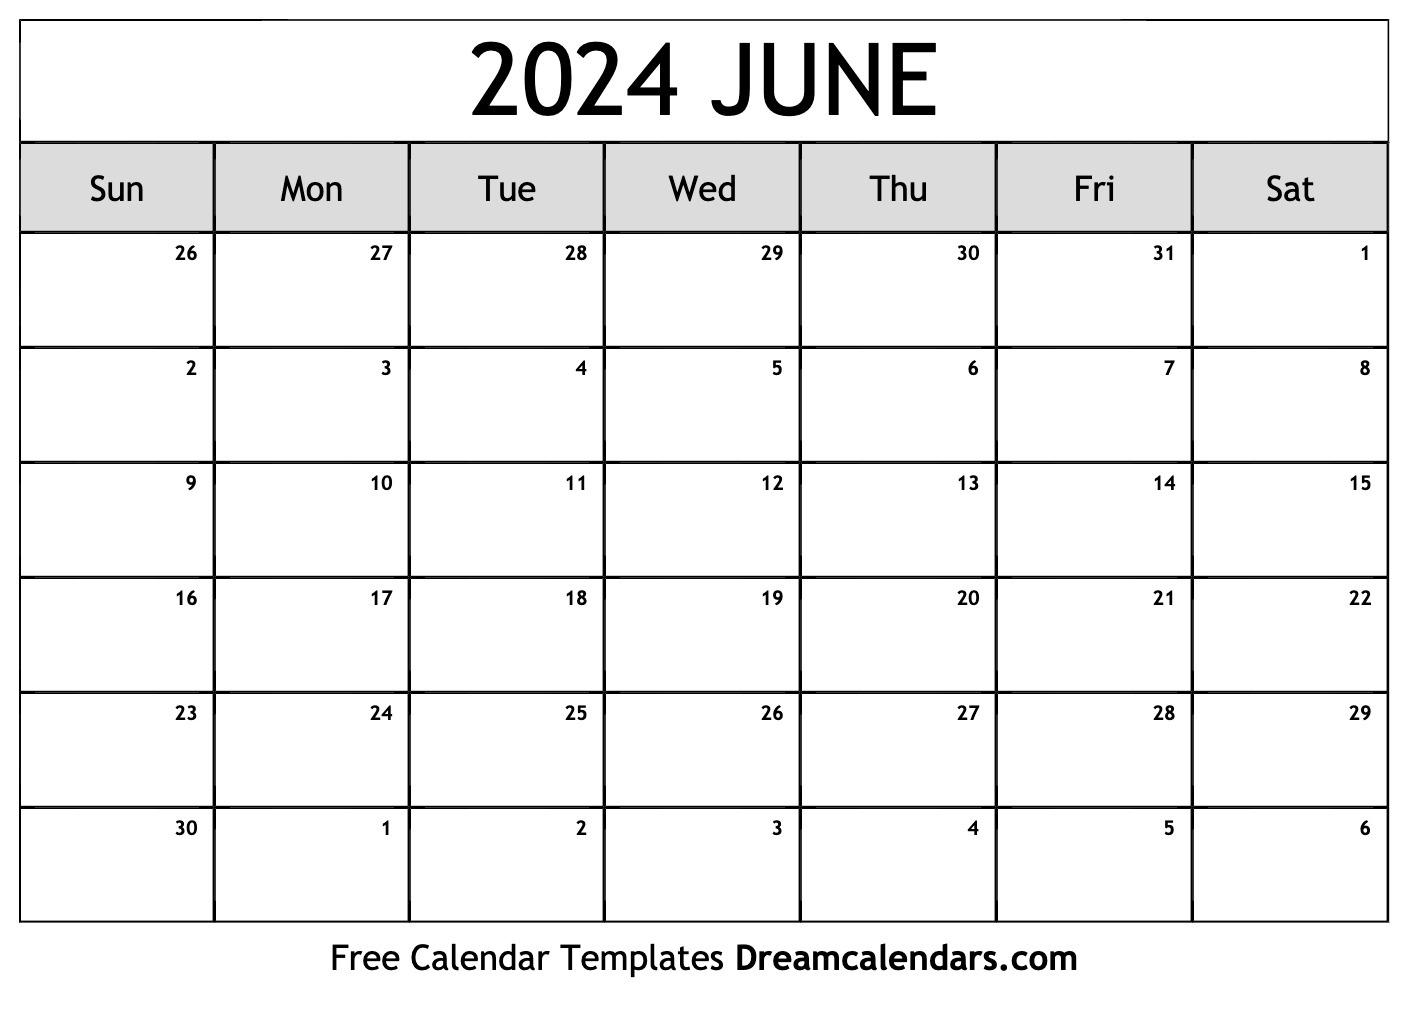 June 2024 Calendar - Free Printable With Holidays And Observances throughout June 1 2024 Calendar